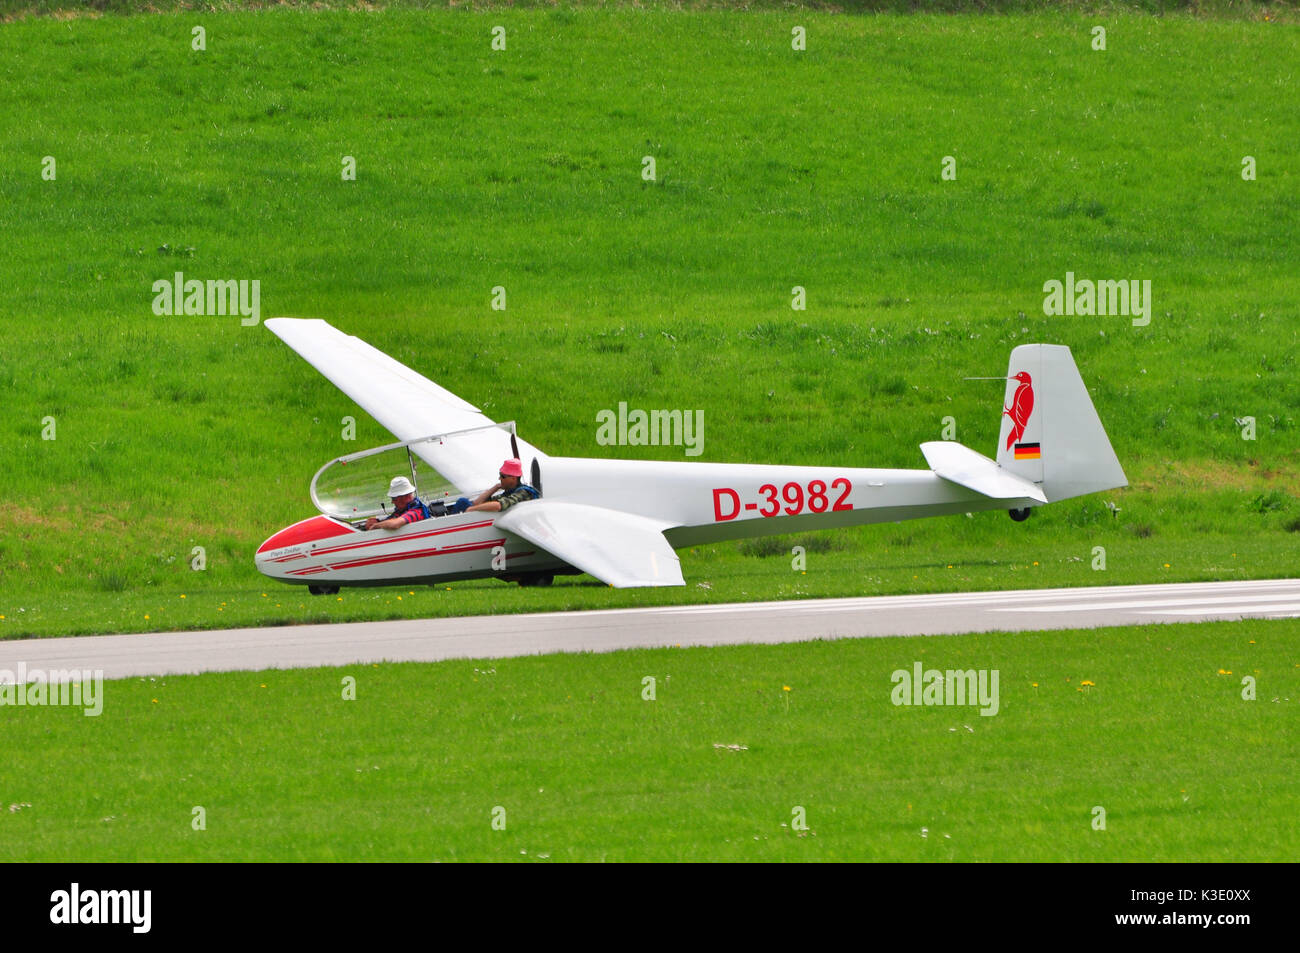 Germany, Bavaria, glider, doubles seater, runway, Stock Photo